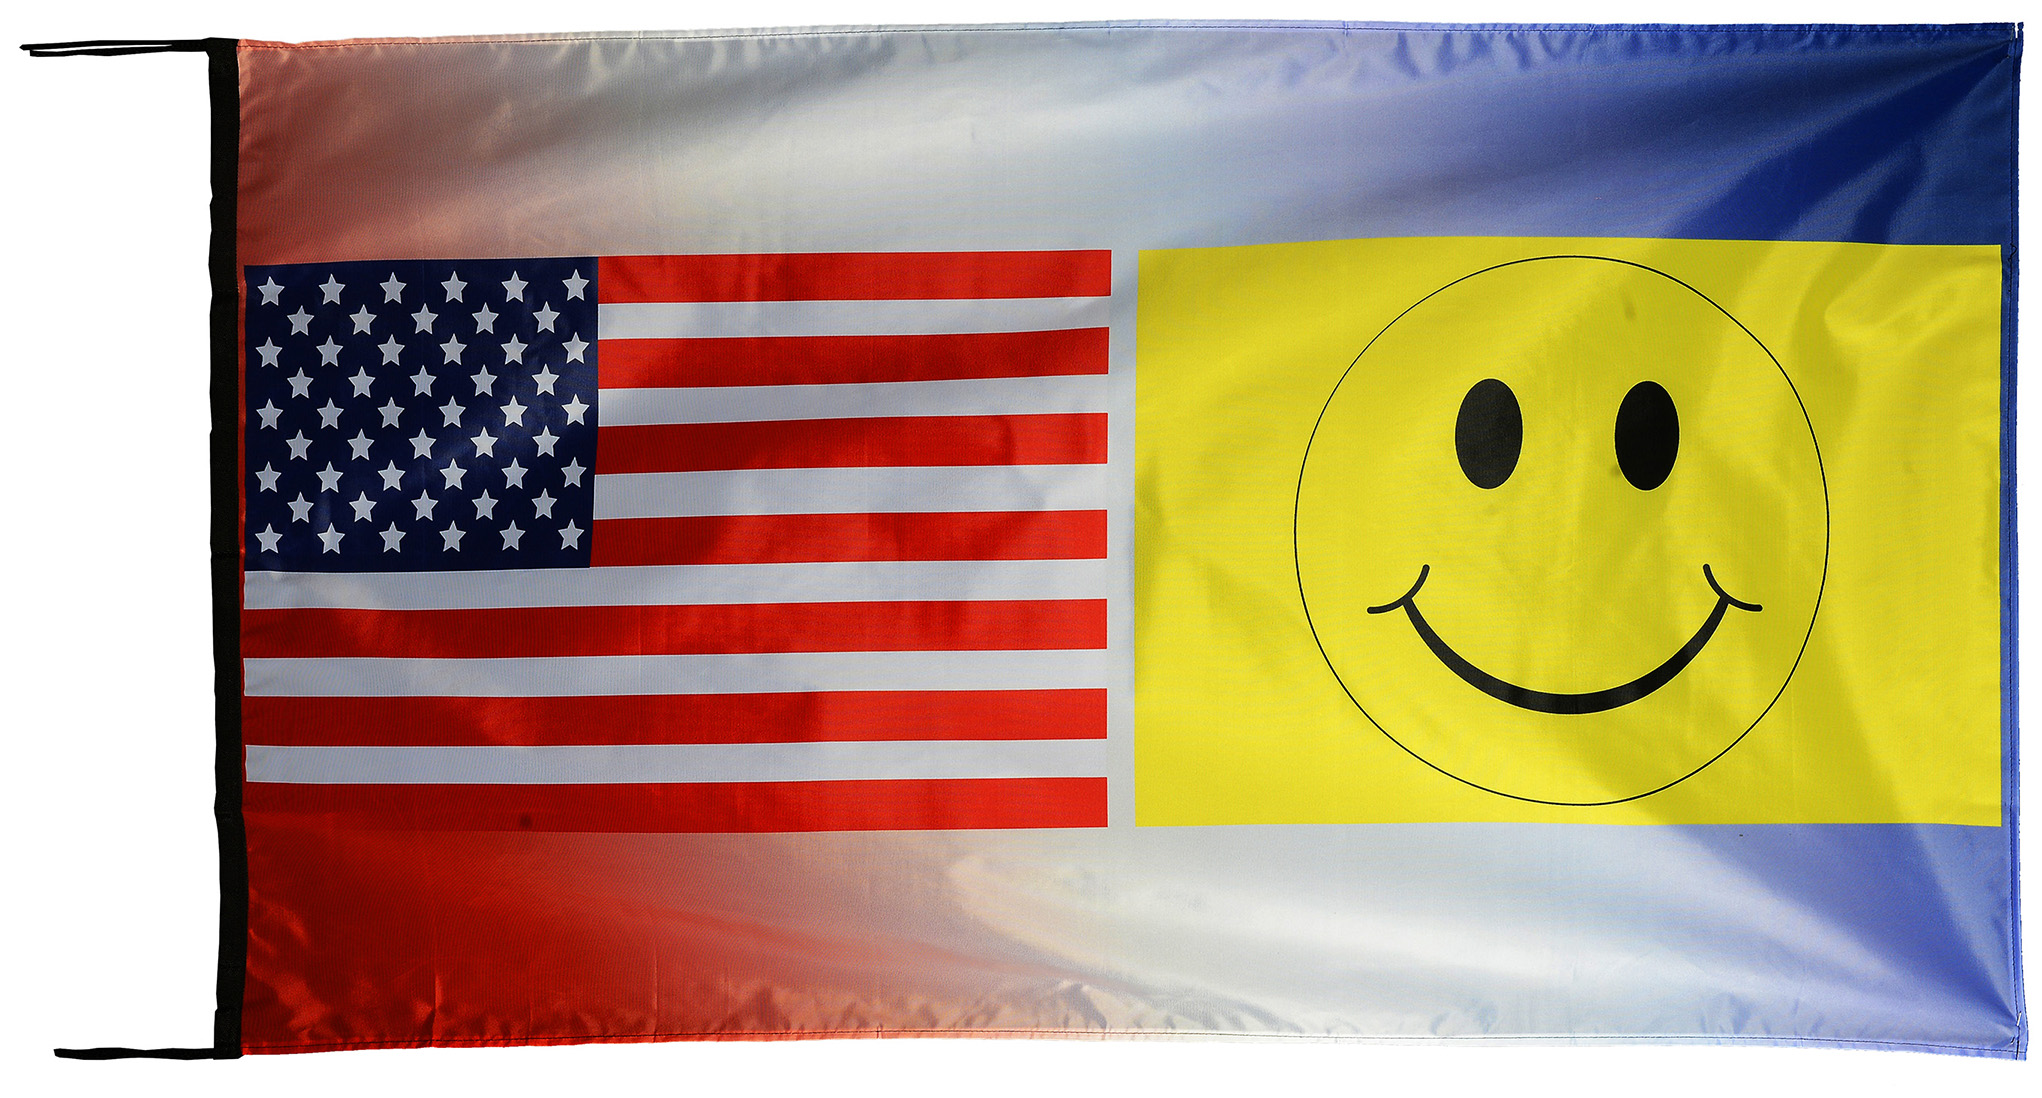 Flag  128 USA / US Country / United States Of America and Smiley Smile Face (Yellow Background) / Patriotic / Pride Hybrid Weather-Resistant Polyester Outdoor Flag Landscape Banner / Vivid Colors / 3 X 5 FT (150 x 90cm) International Flags for Sale